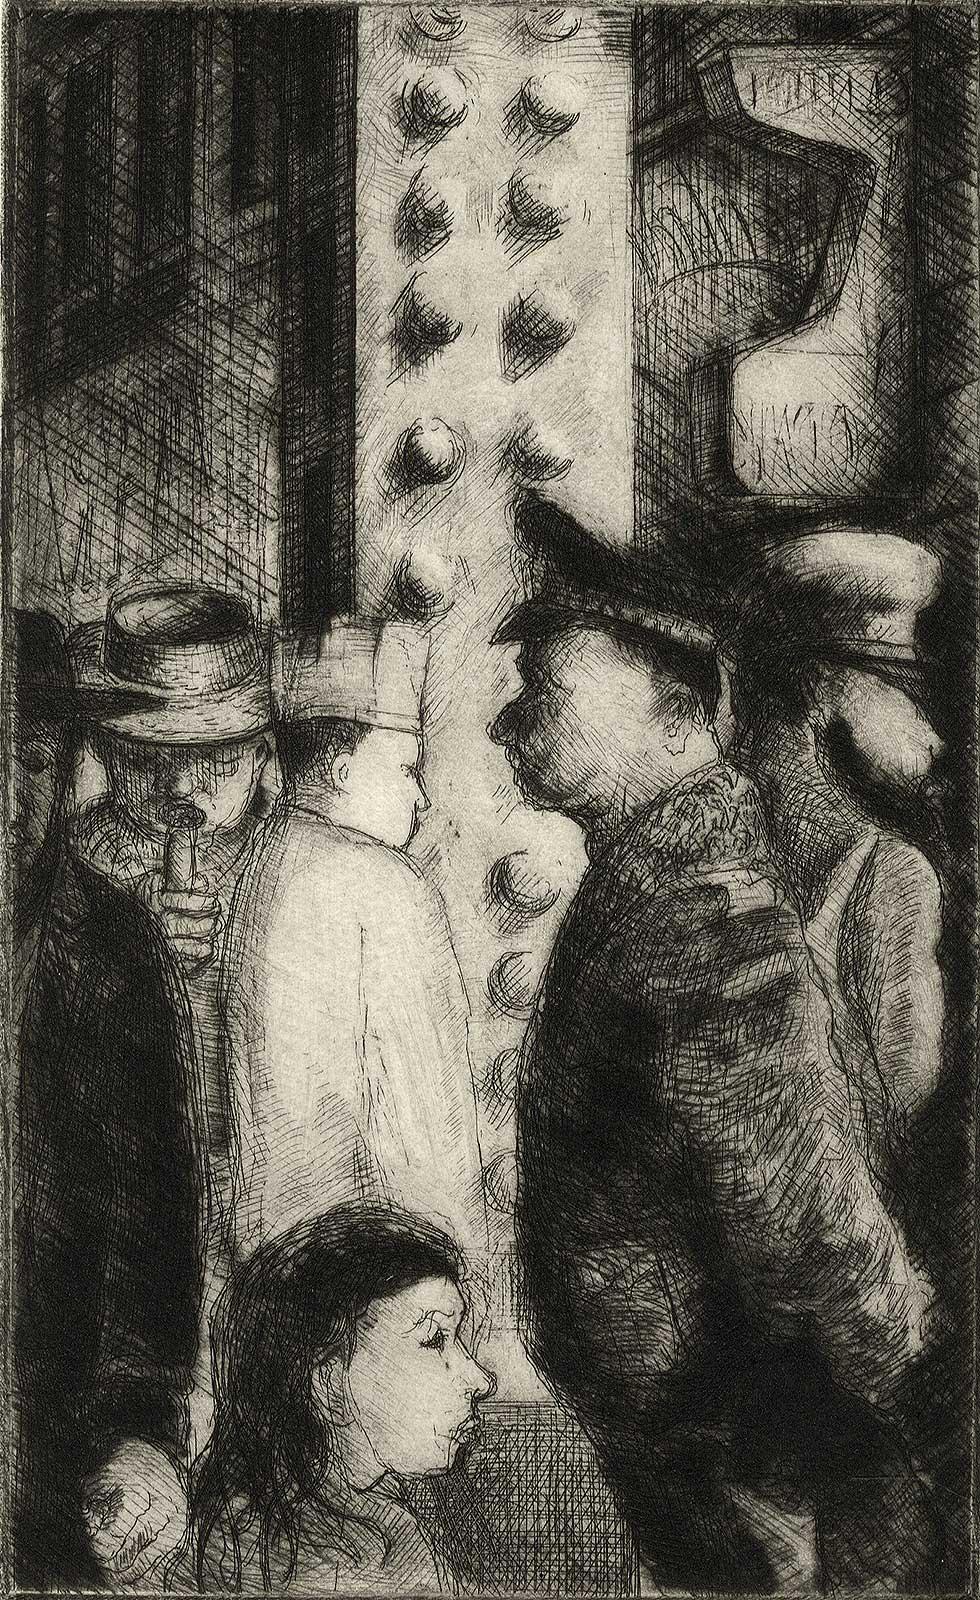 Richard Gilbert Figurative Print - The Loop I (the artist's memories of days at Chicago's Art Institute)